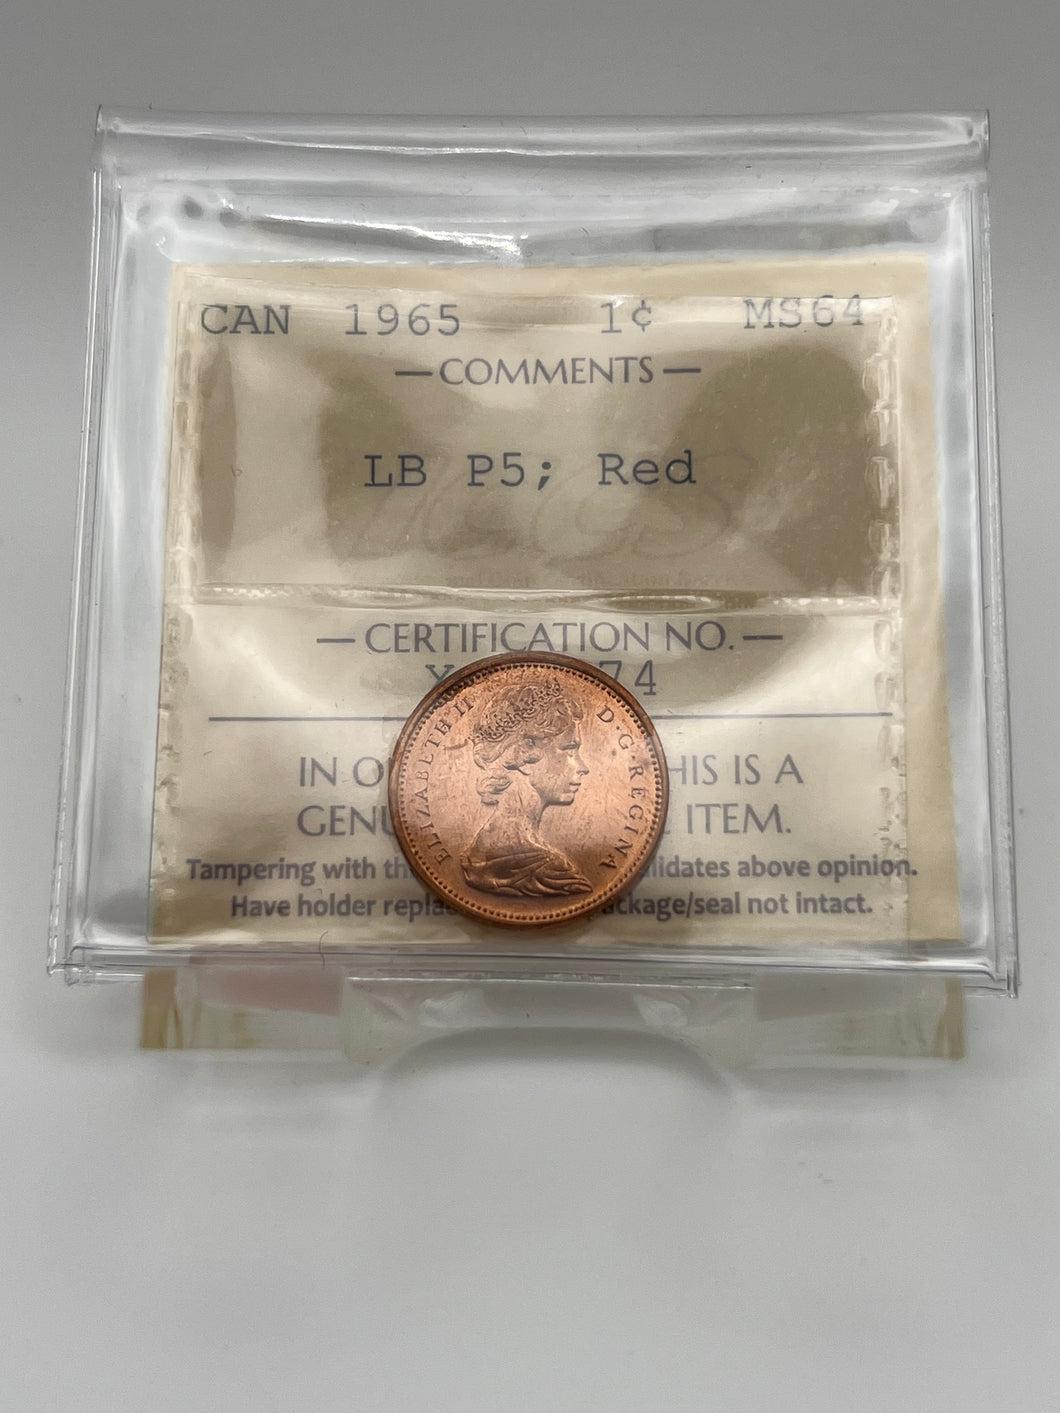 Canada One Cent 1964 MS-64 ICCS-LB P5